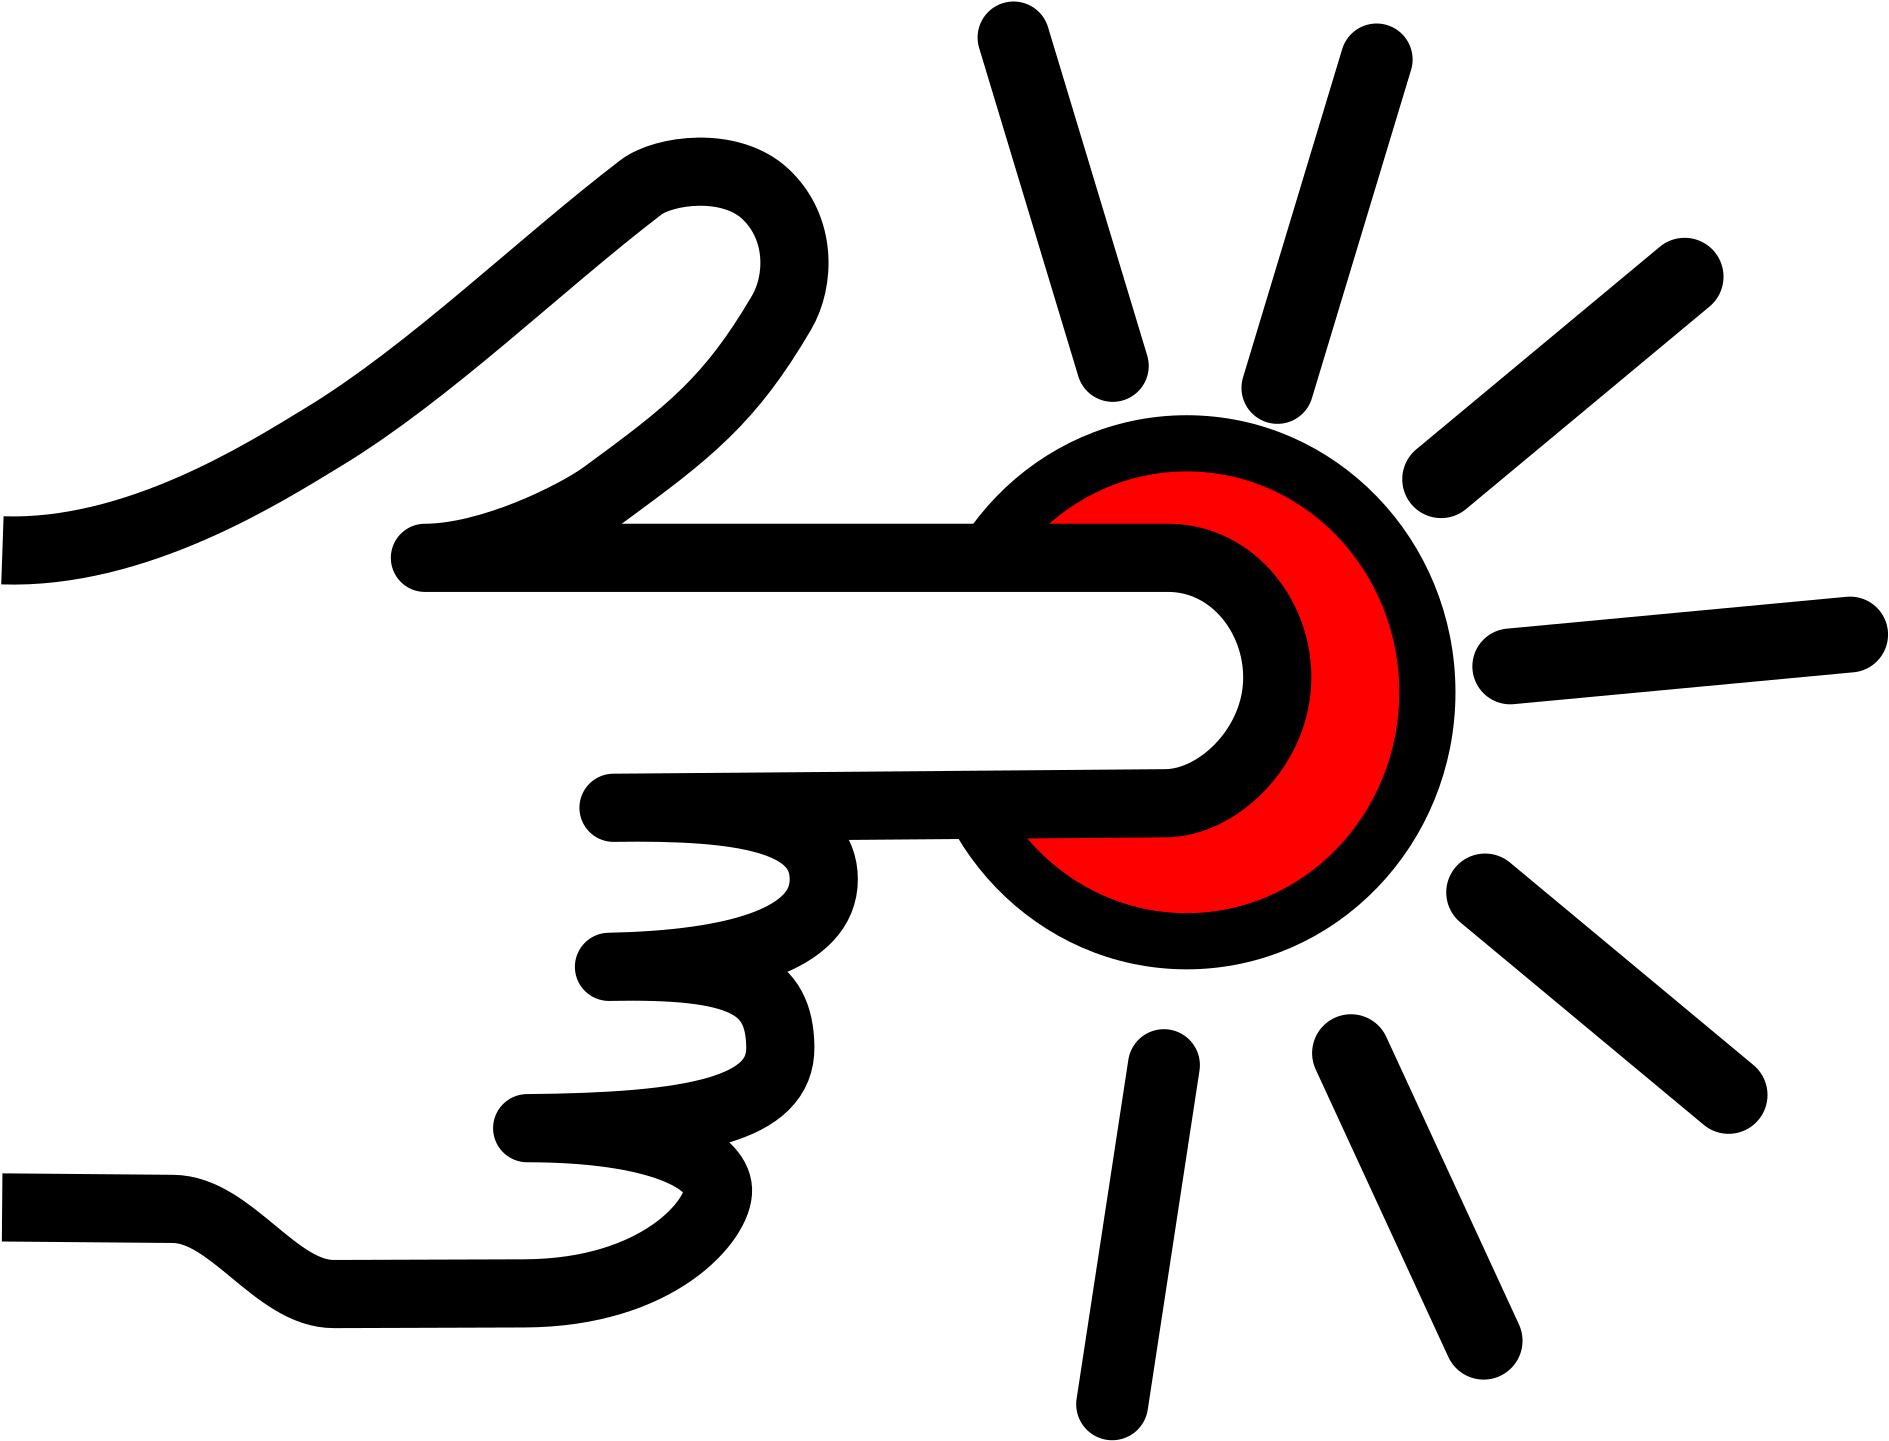 Press Button Sign - Finger Pushing A Red Button Shower Curtain (2400x1920)